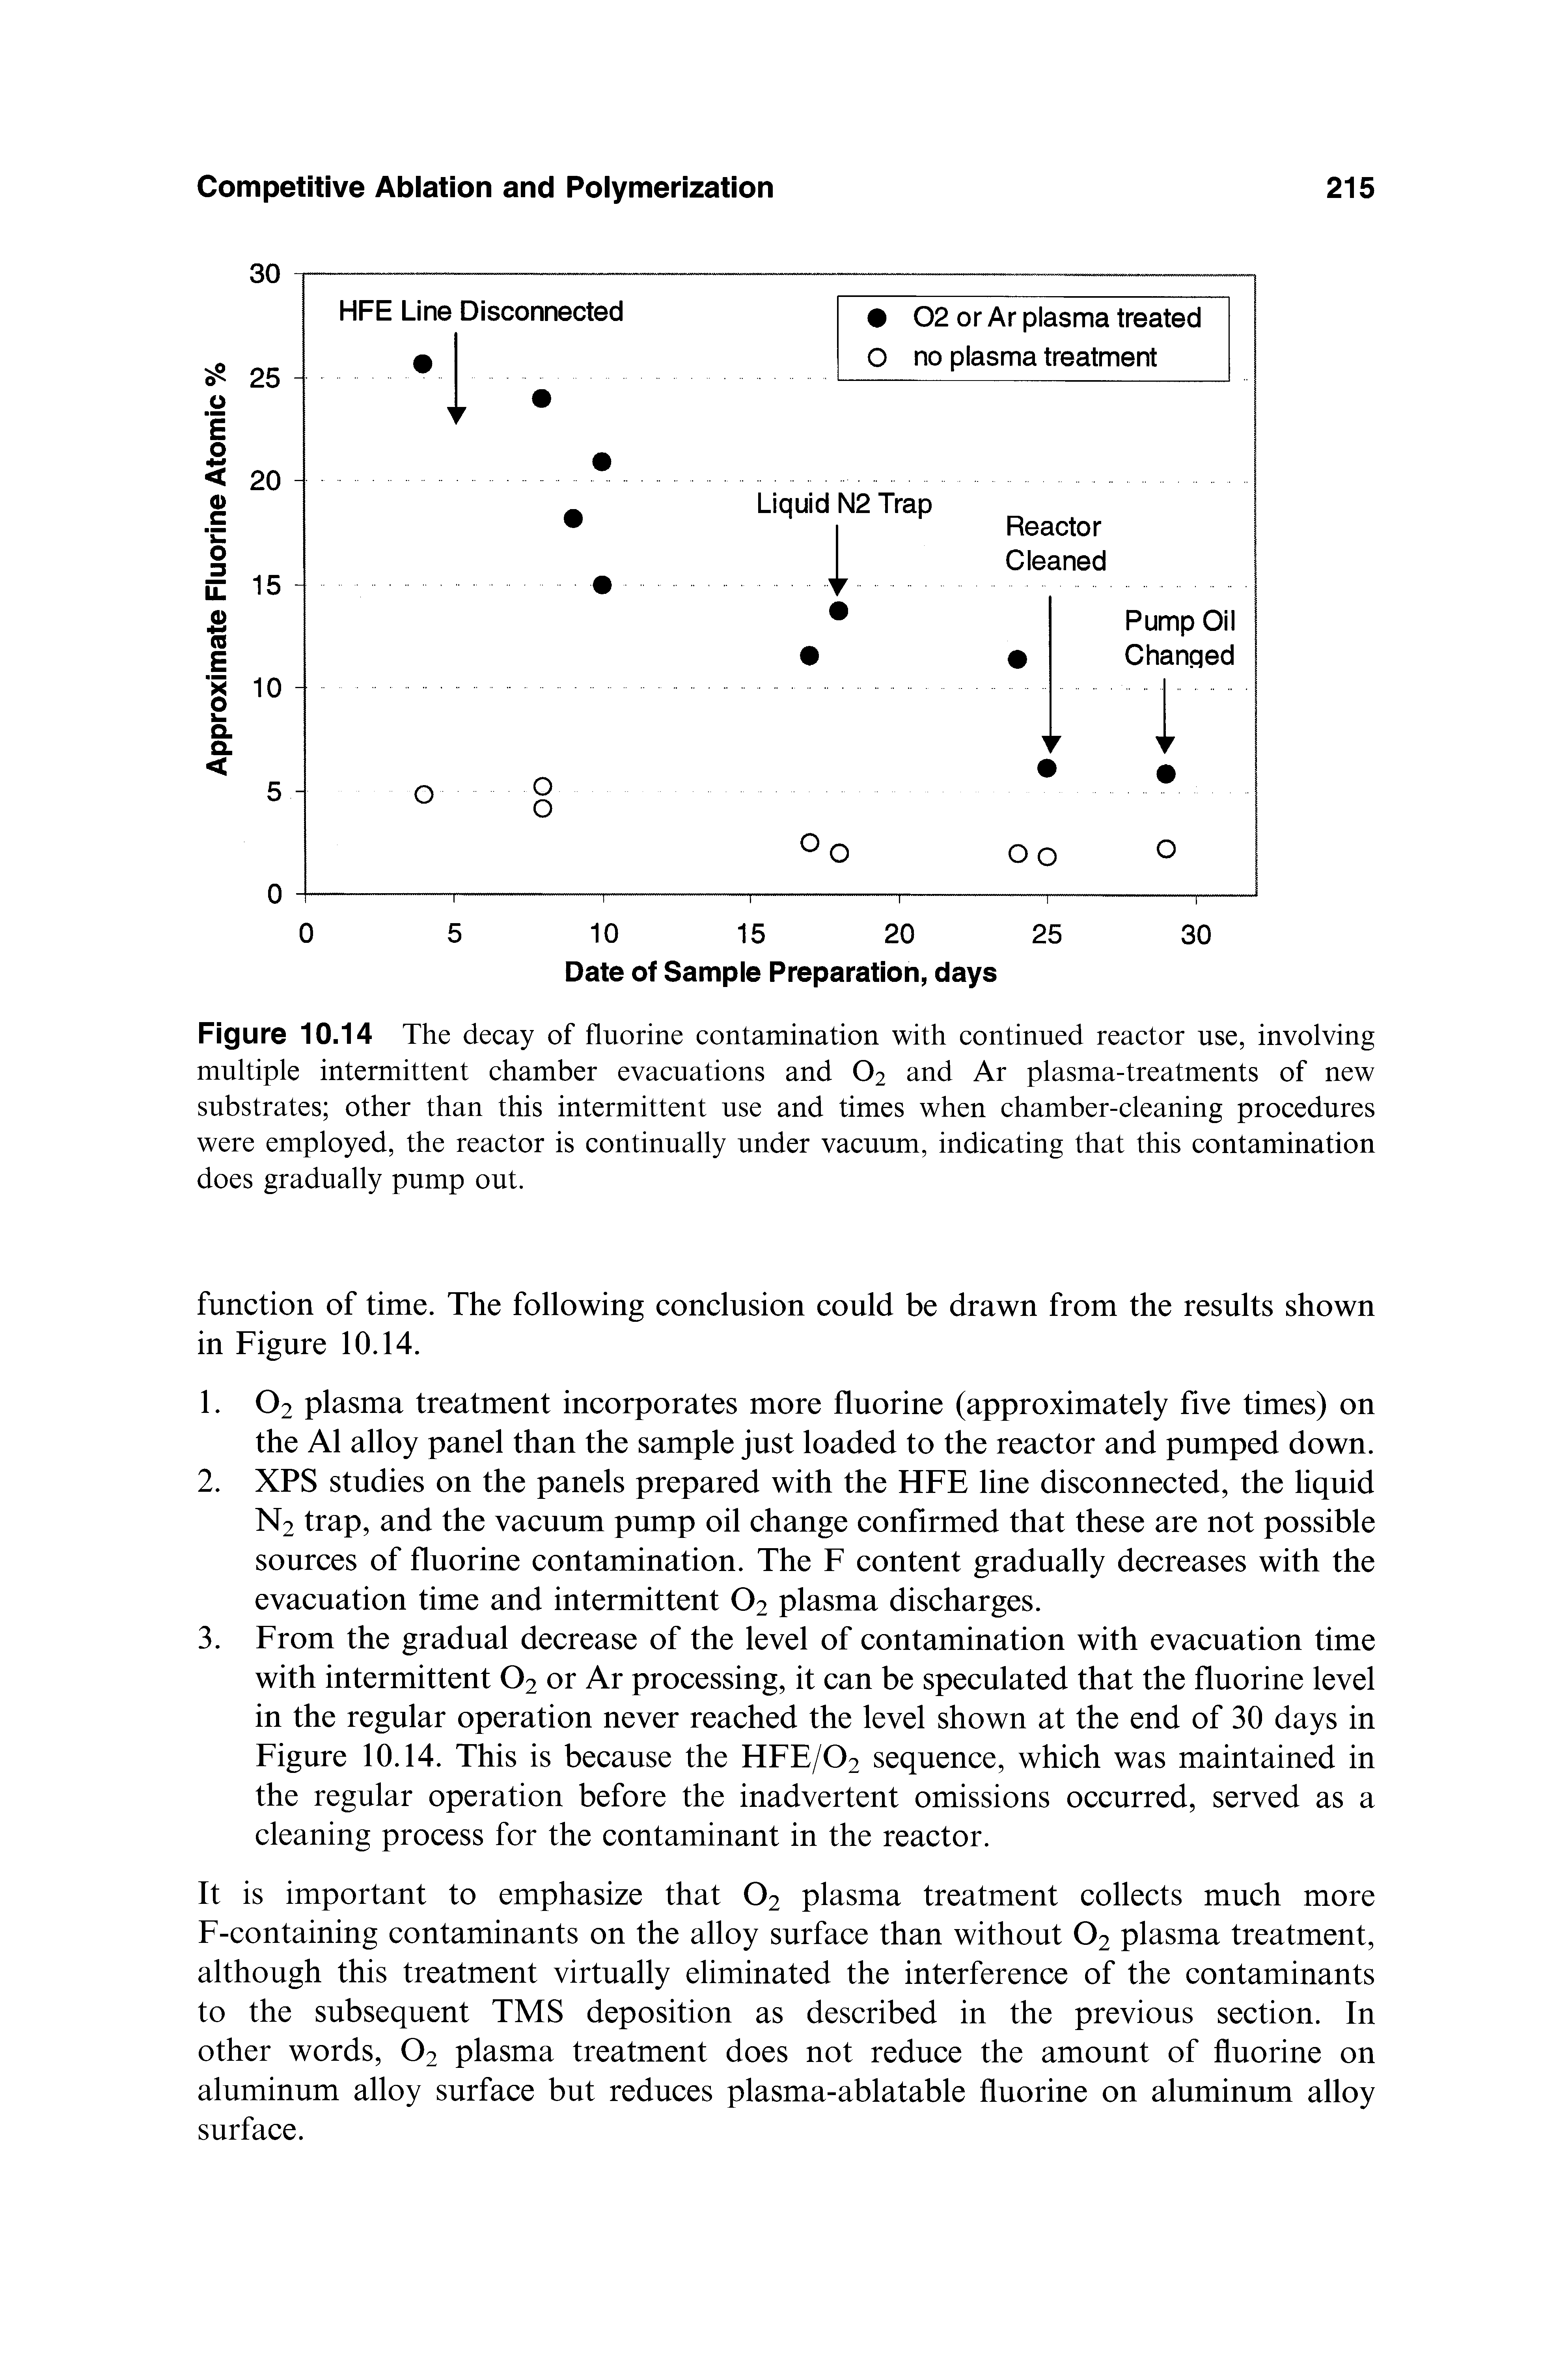 Figure 10.14 The decay of fluorine contamination with continued reactor use, involving multiple intermittent chamber evacuations and O2 and Ar plasma-treatments of new substrates other than this intermittent use and times when chamber-cleaning procedures were employed, the reactor is continually under vacuum, indicating that this contamination does gradually pump out.